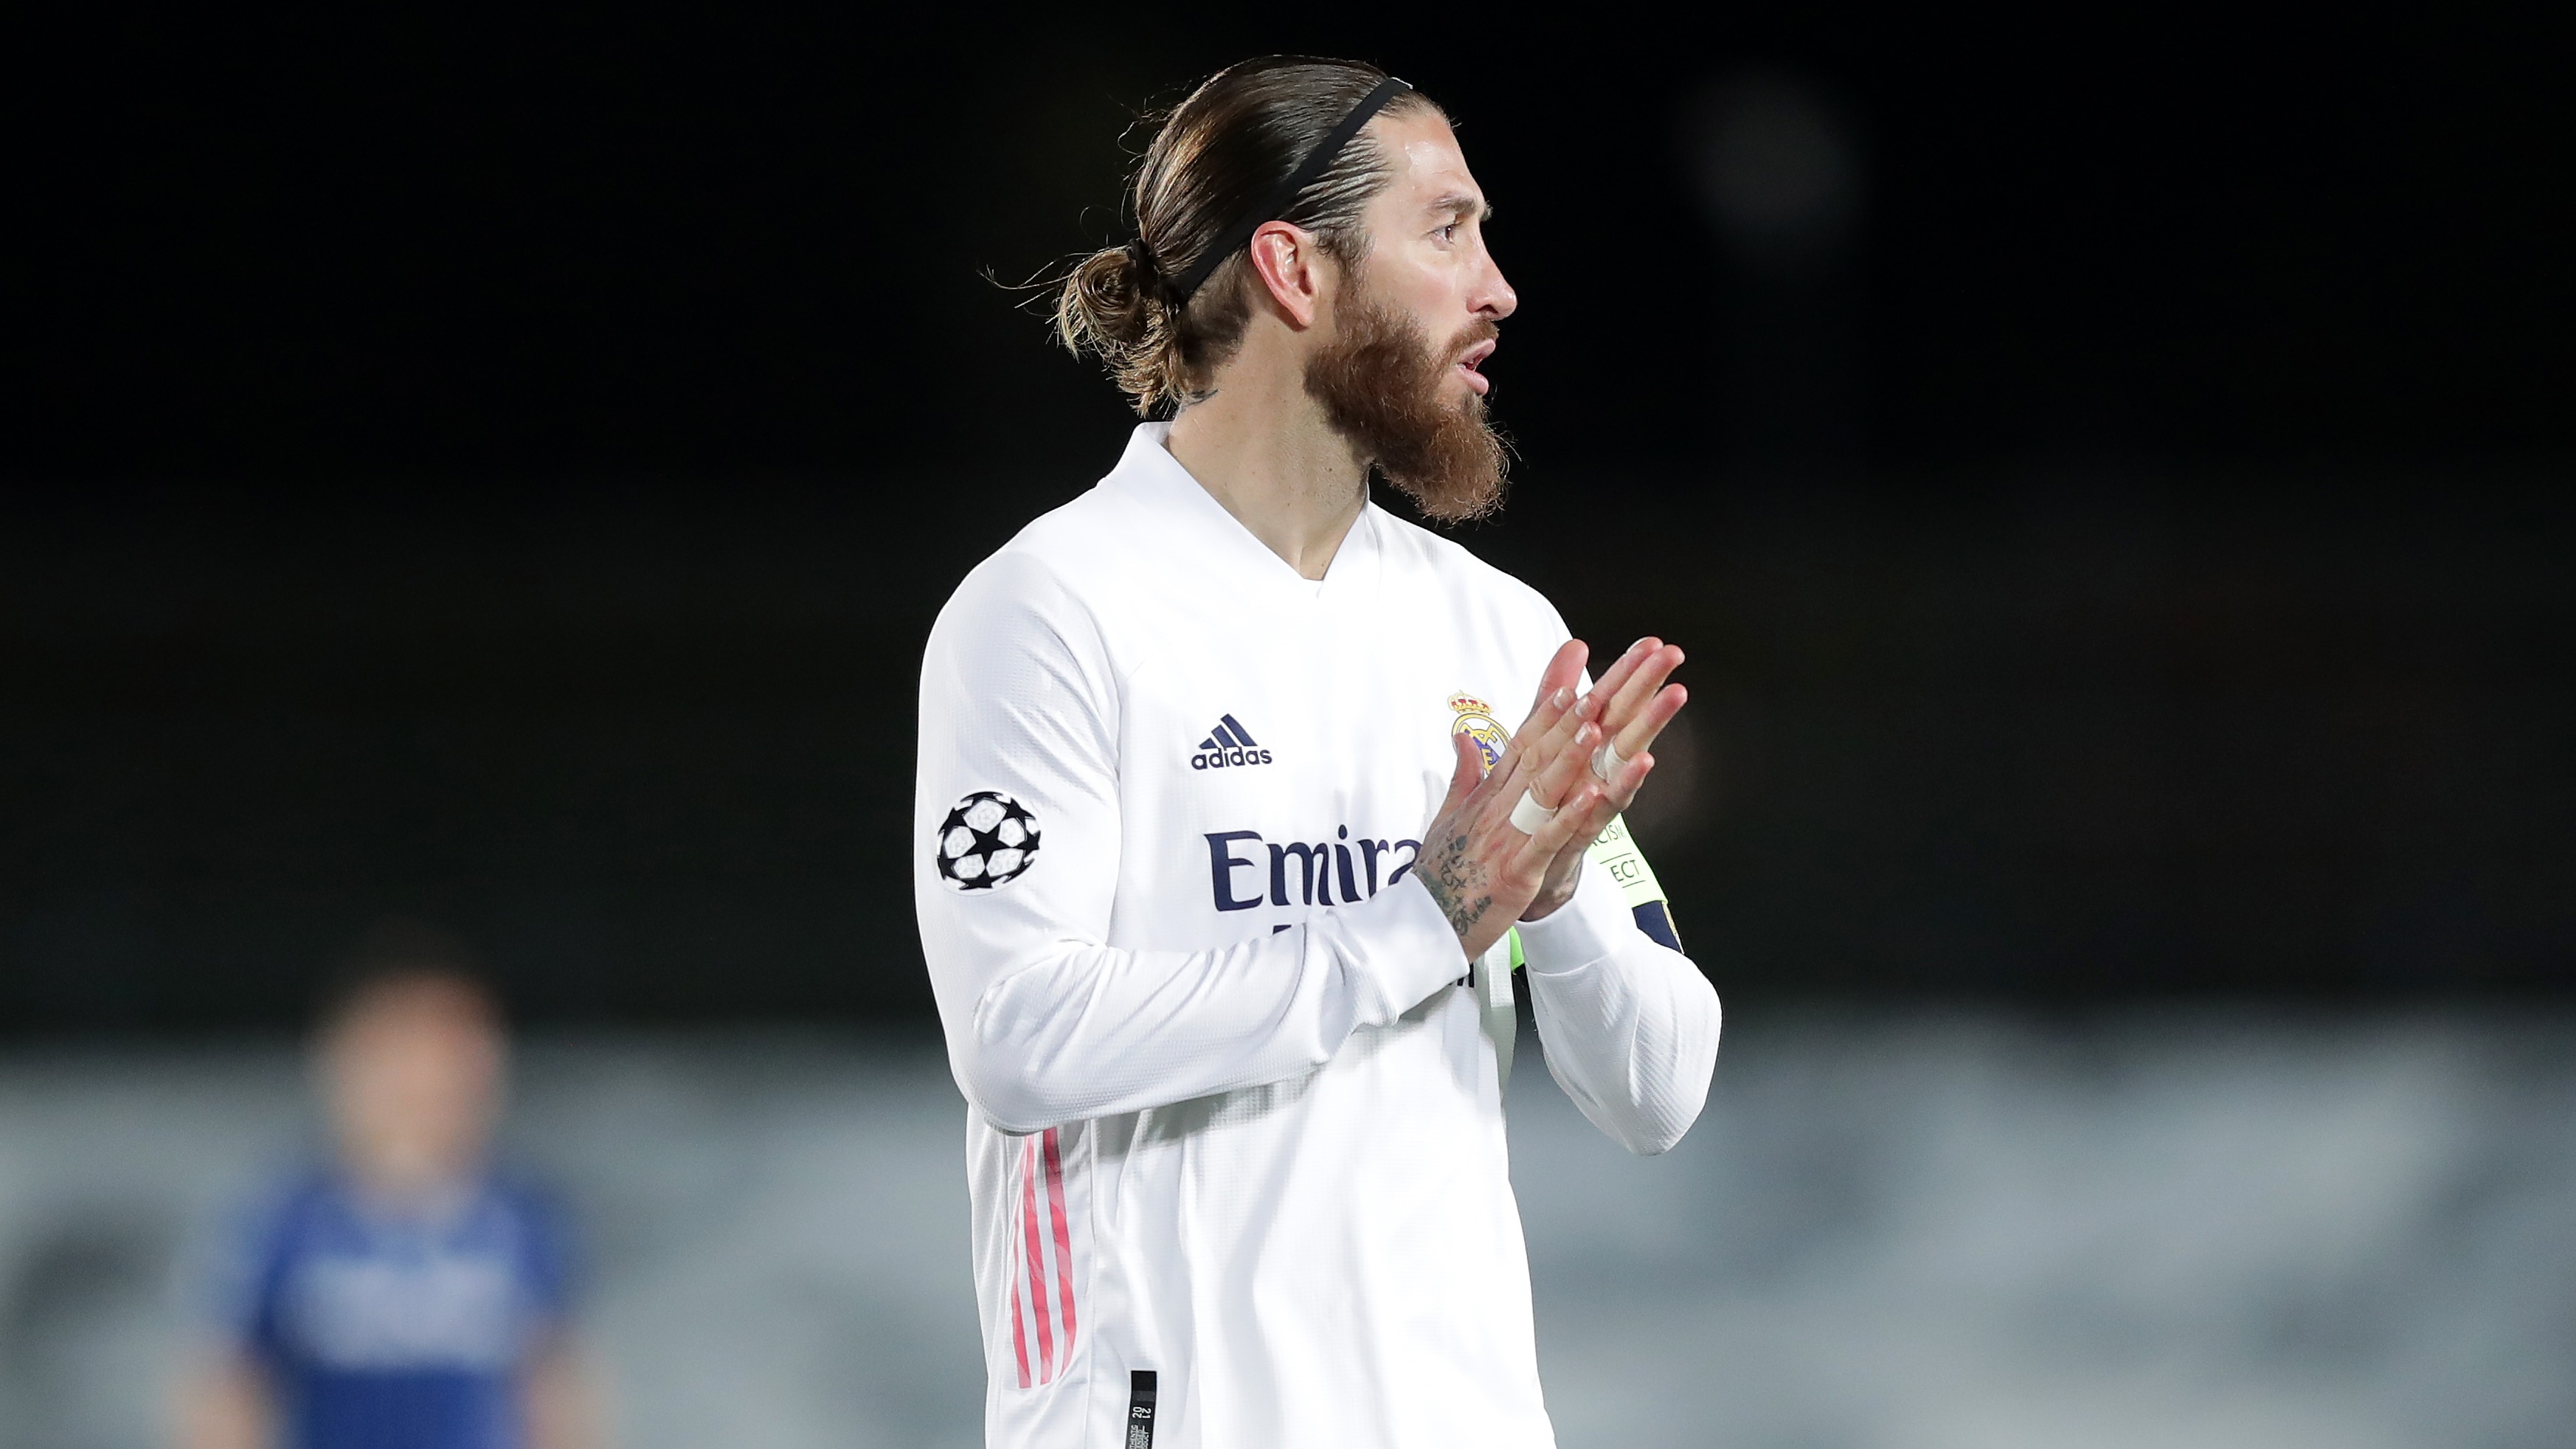 'F*cked, yes, but we still have the league' - Ramos reacts to Chelsea defeat